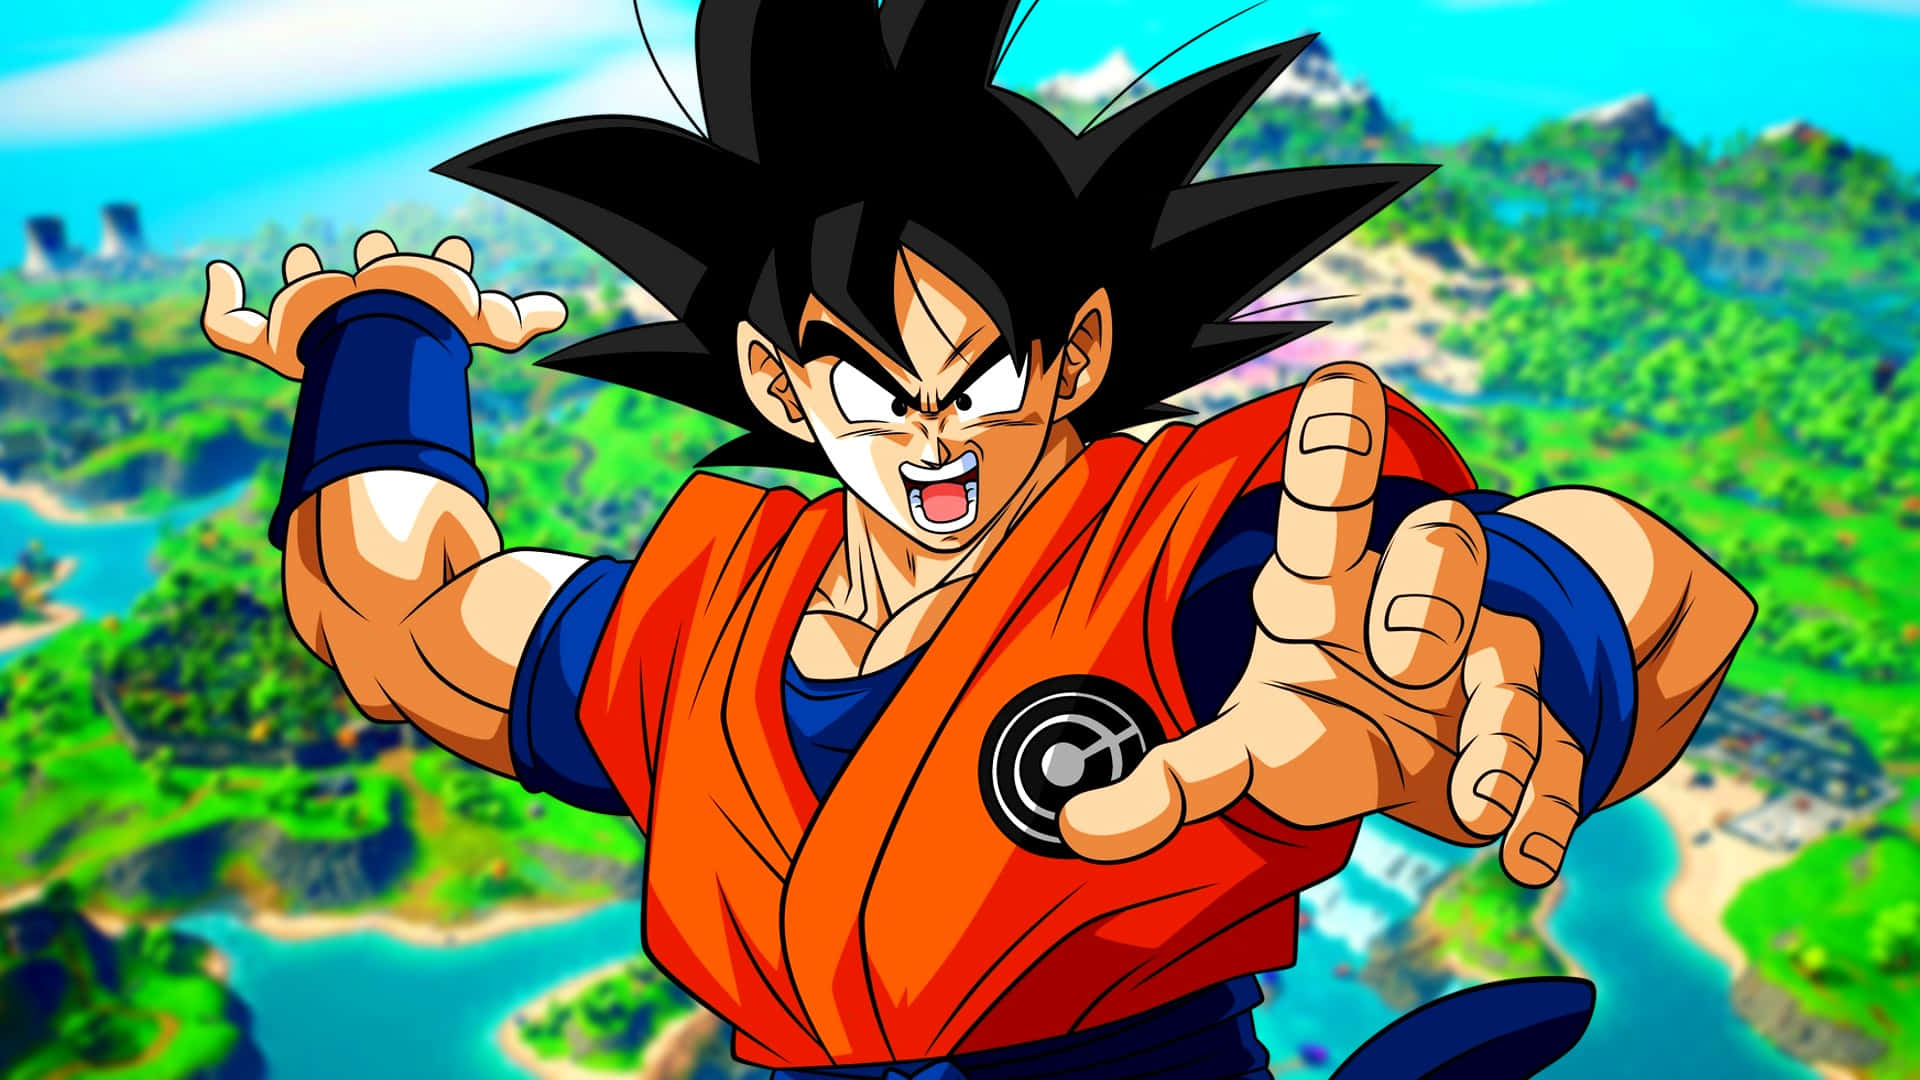 Cool Goku Dragonball Z Pictures